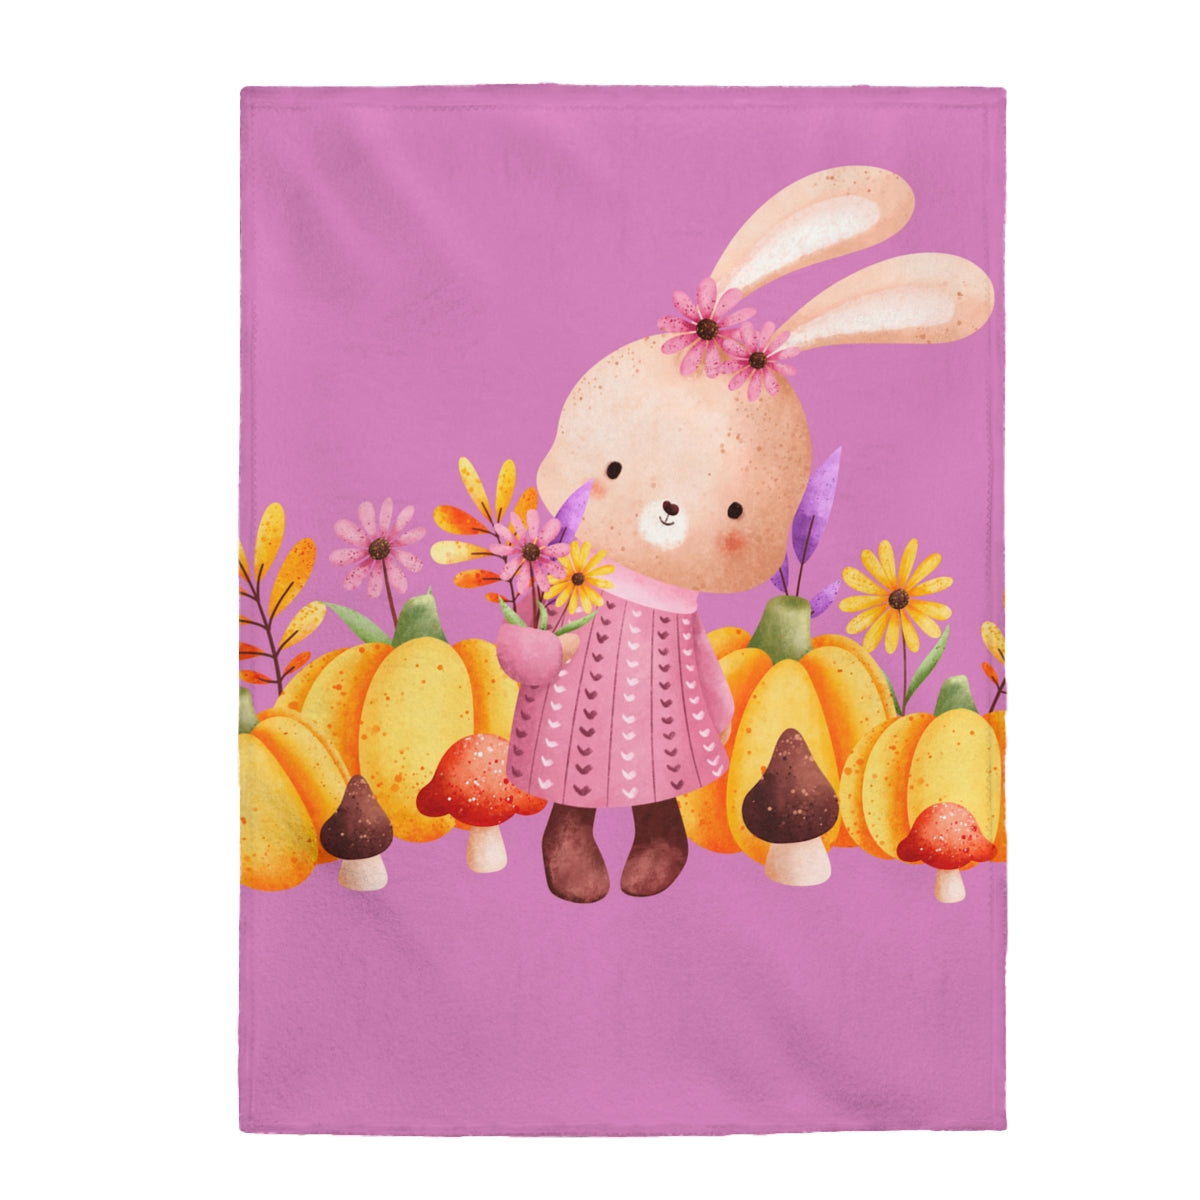 BABY BLANKET BUNNY AND PUMPKINS, PLUSH BLANKET SUPER SOFT THROW FOR KIDS, TEENS, ADULTS, 3 SIZES | ARTZIRA